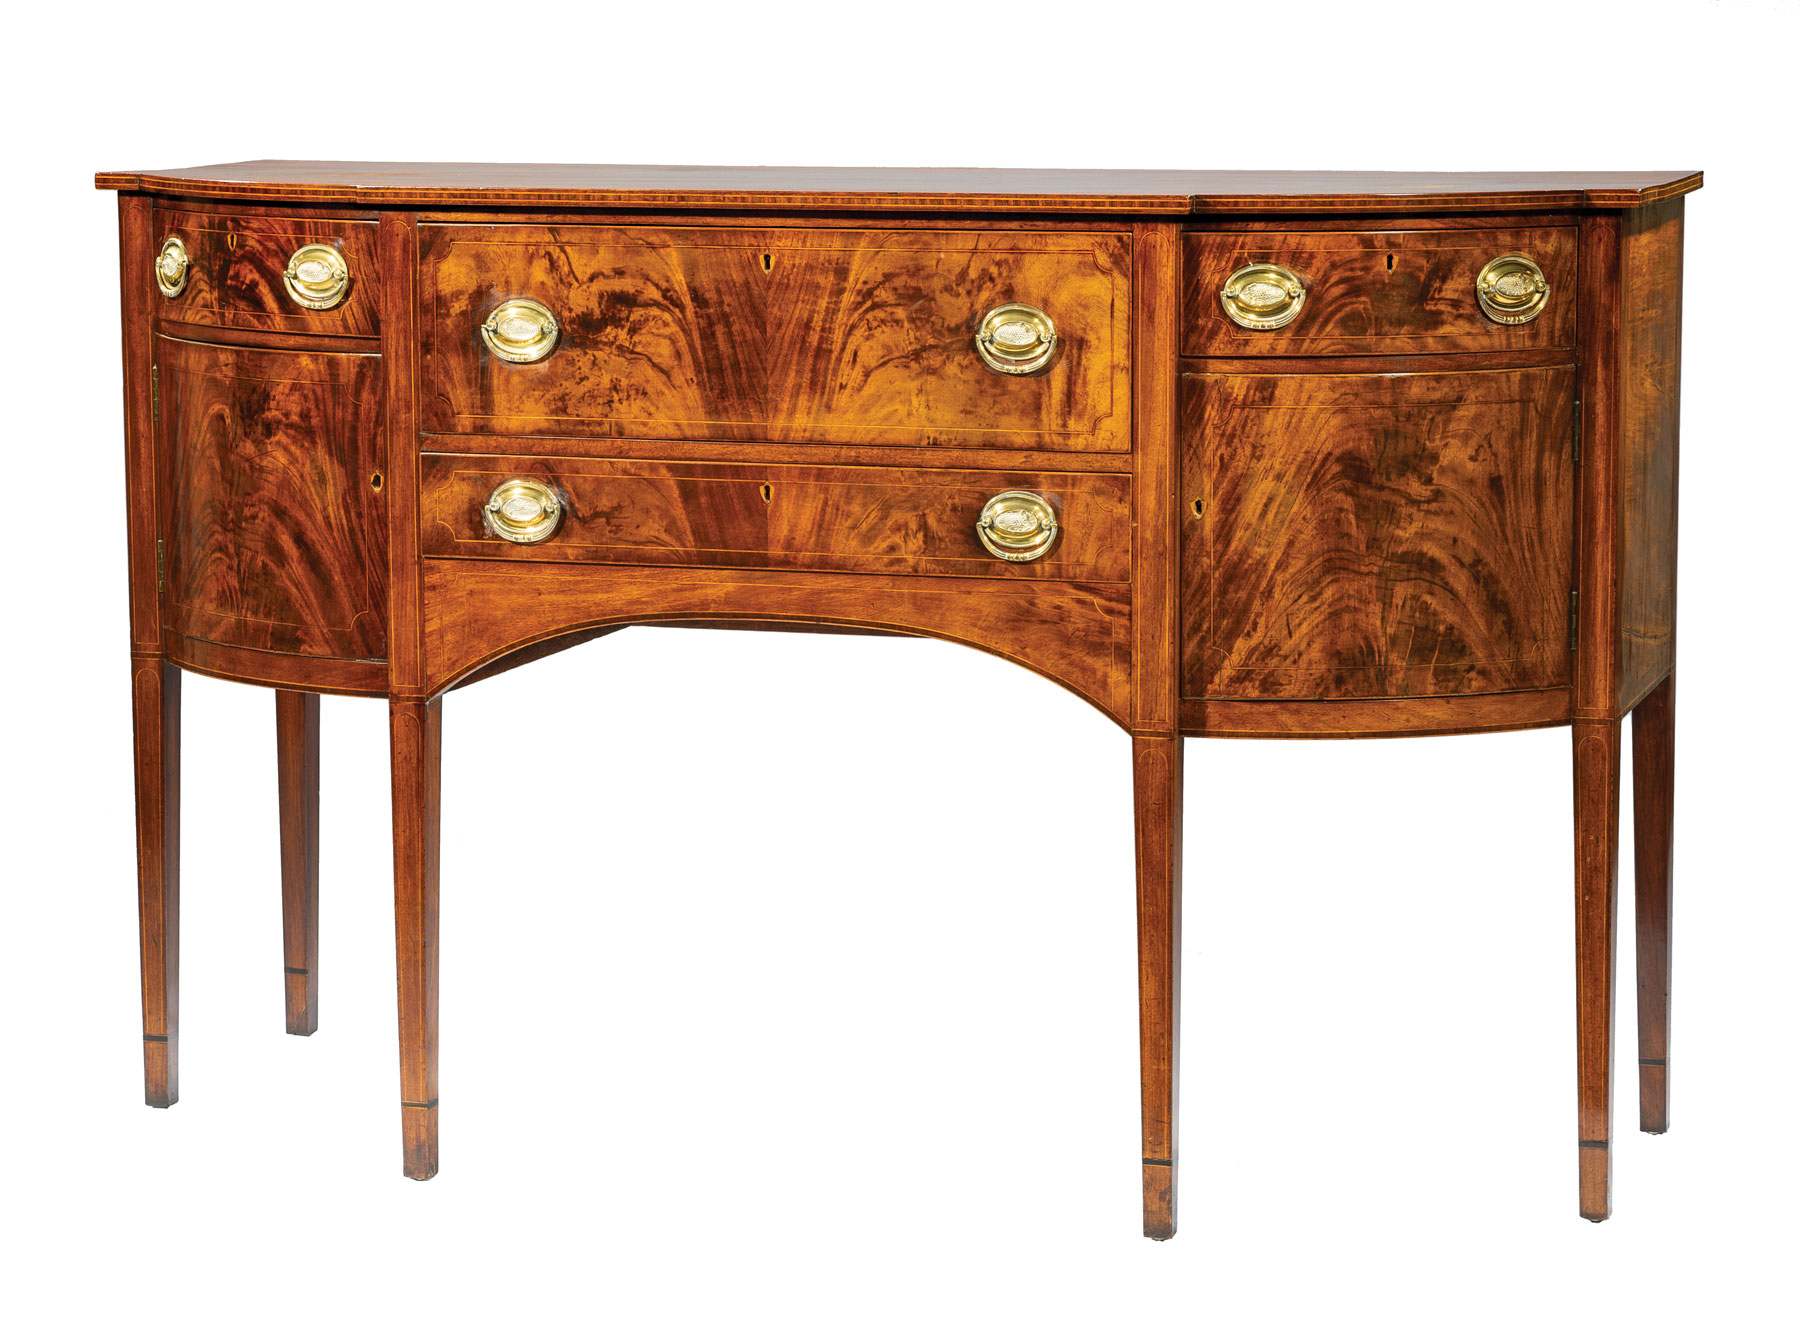 American Federal Inlaid Mahogany Sideboard, late 18th/early 19th c., shaped top, conforming case